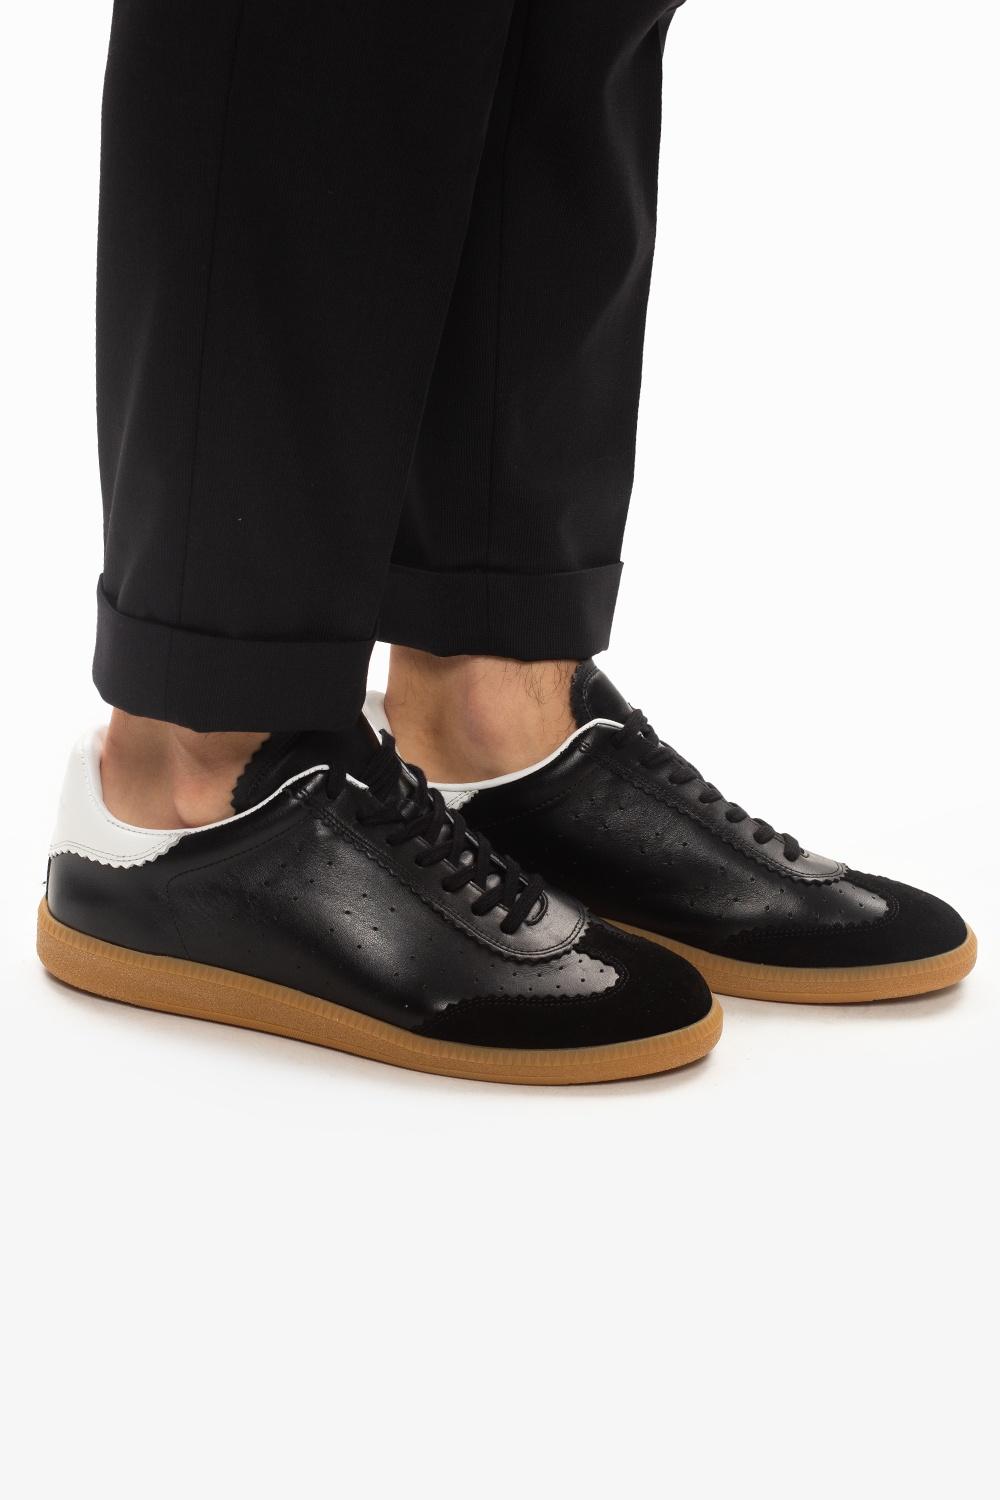 Isabel Marant Leather Étoile 'bryce' Sneakers in Black for Men 